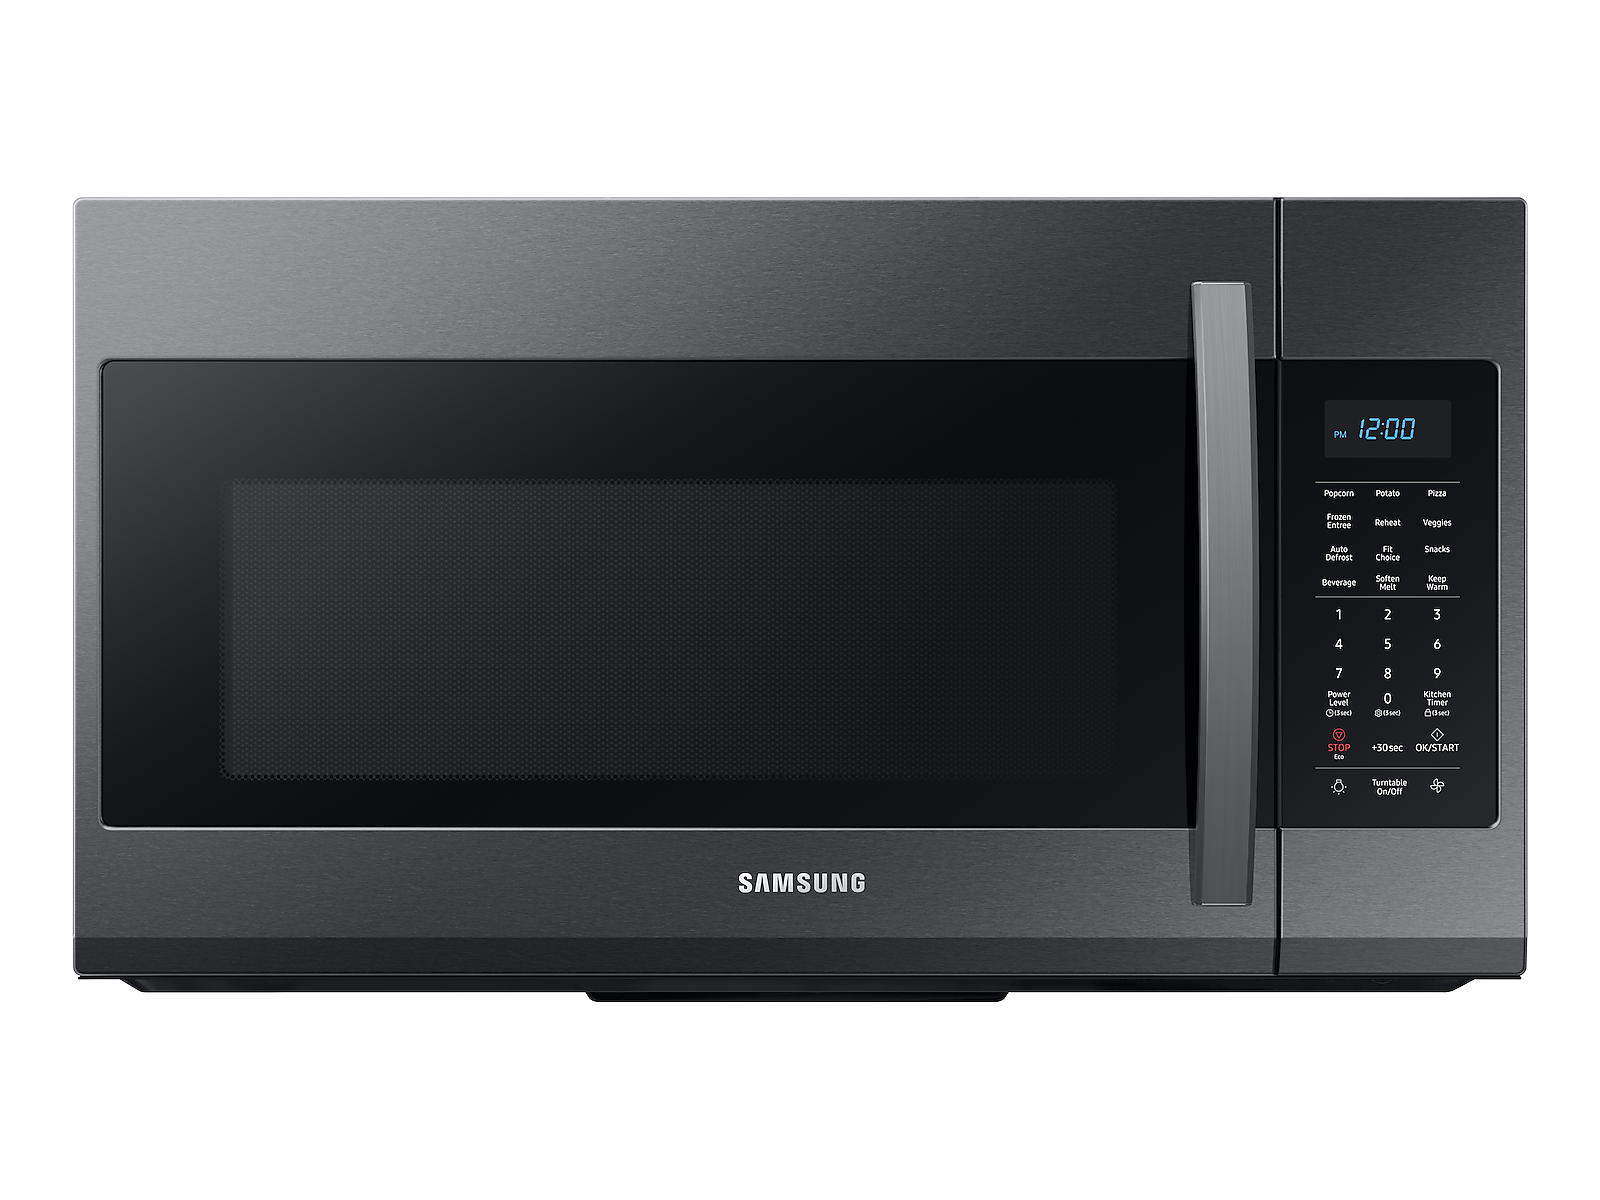 Samsung 1.9 cu. ft. Over-the-Range Microwave with Sensor Cooking in Black Stainless Steel(ME19R7041FG/AA) photo